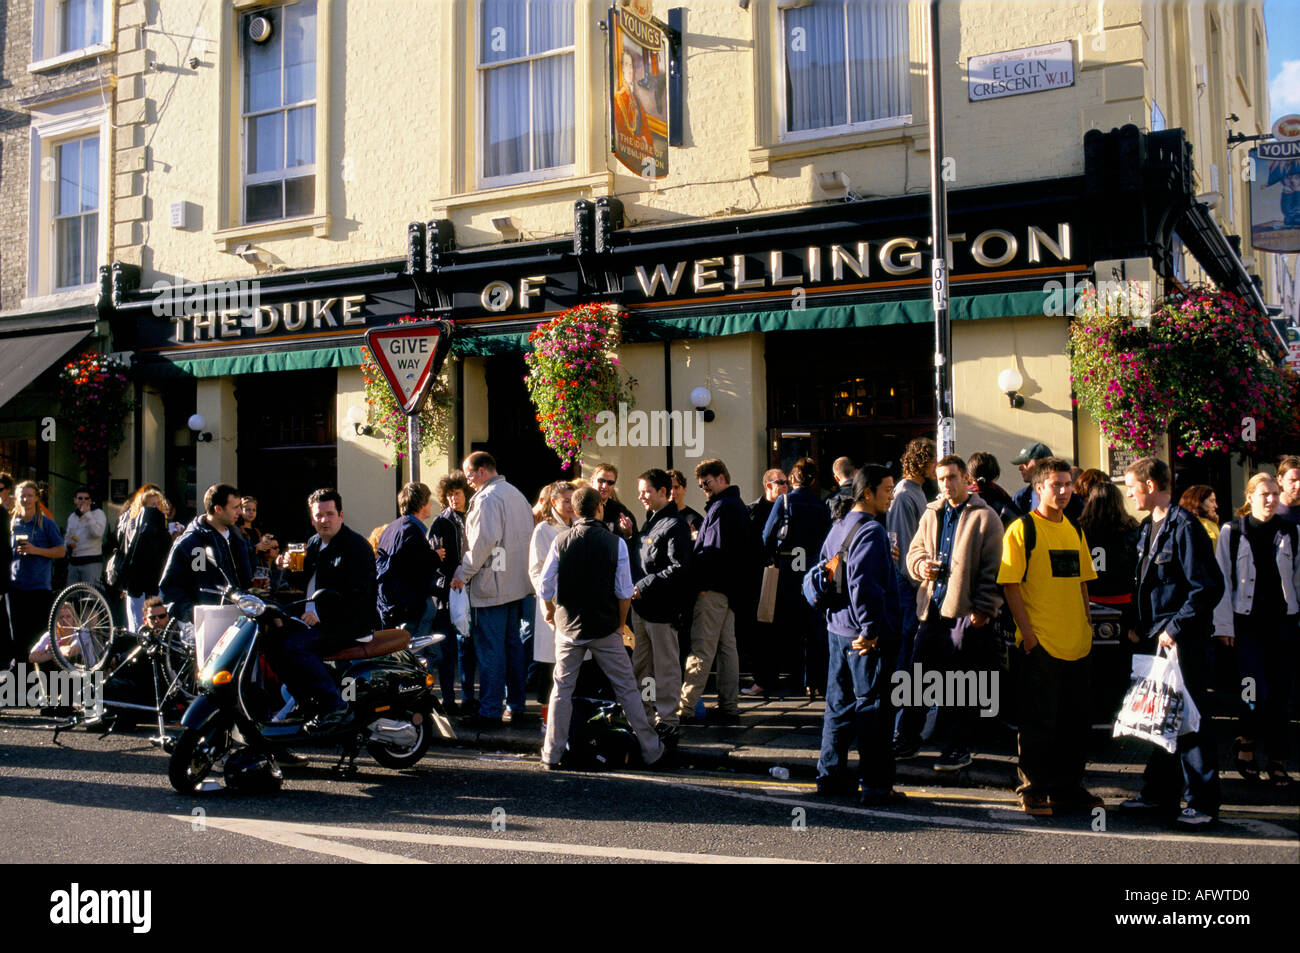 Duke of Wellington pub, Portobello Road, Notting Hill, London. Crowds of Saturday lunch time drinkers on the pavement. 1990s UK HOMER SYKES Stock Photo